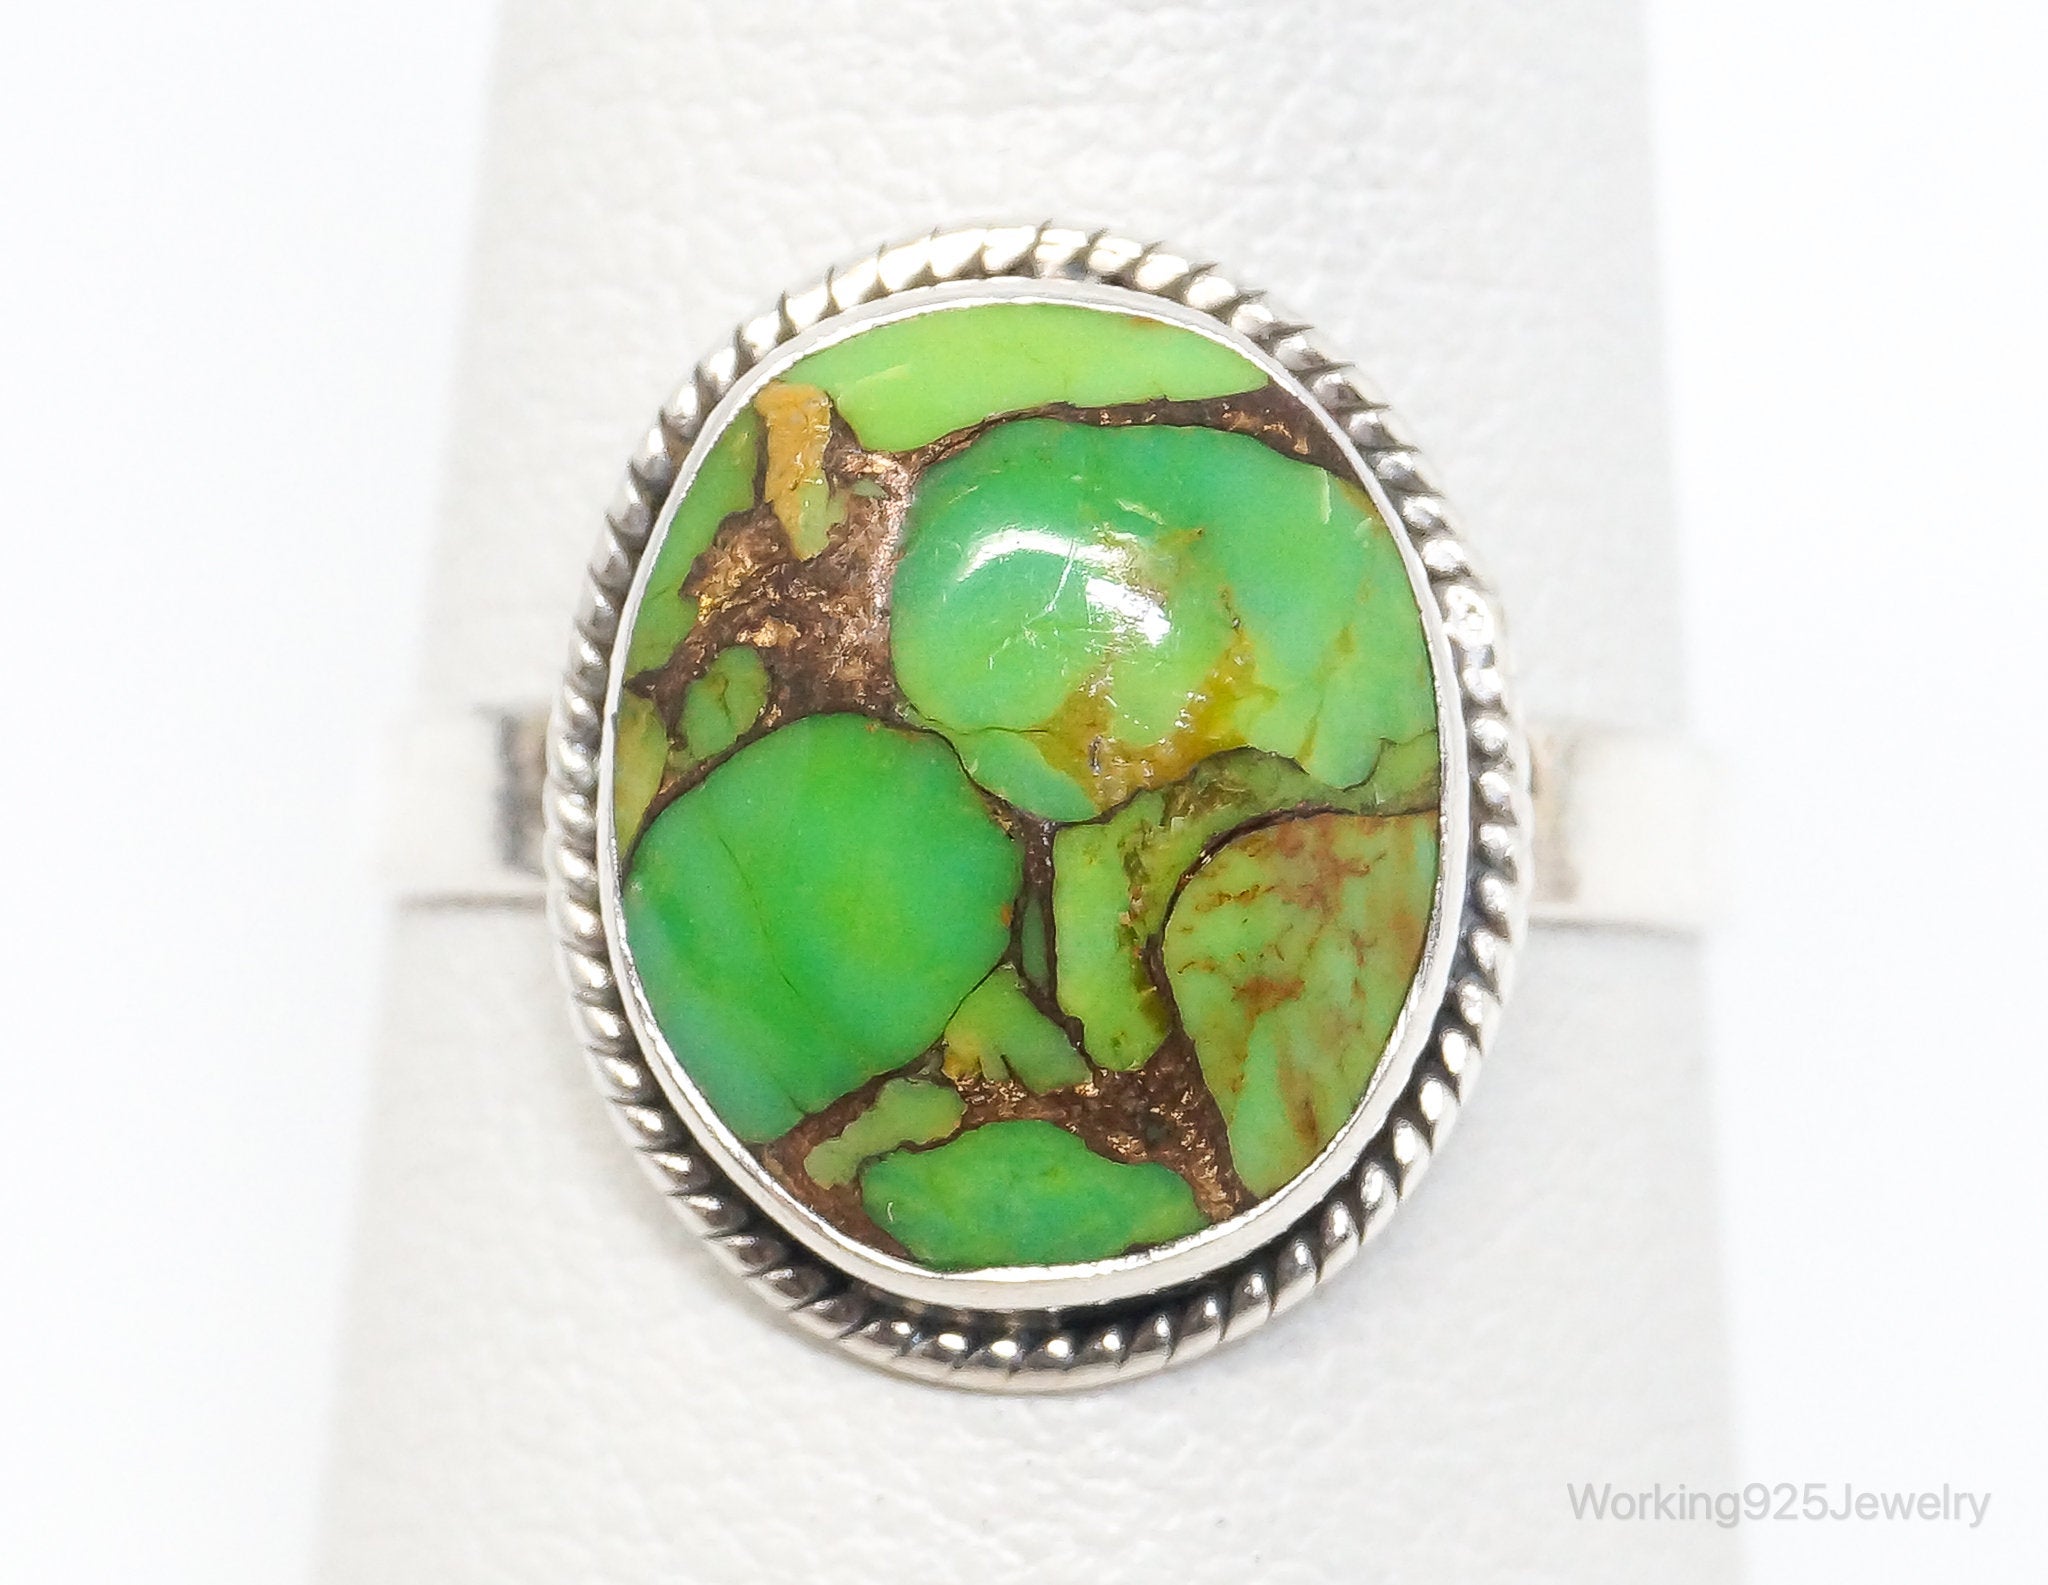 VTG Native American Unsigned Green Turquoise Sterling Silver Ring SZ 6.5